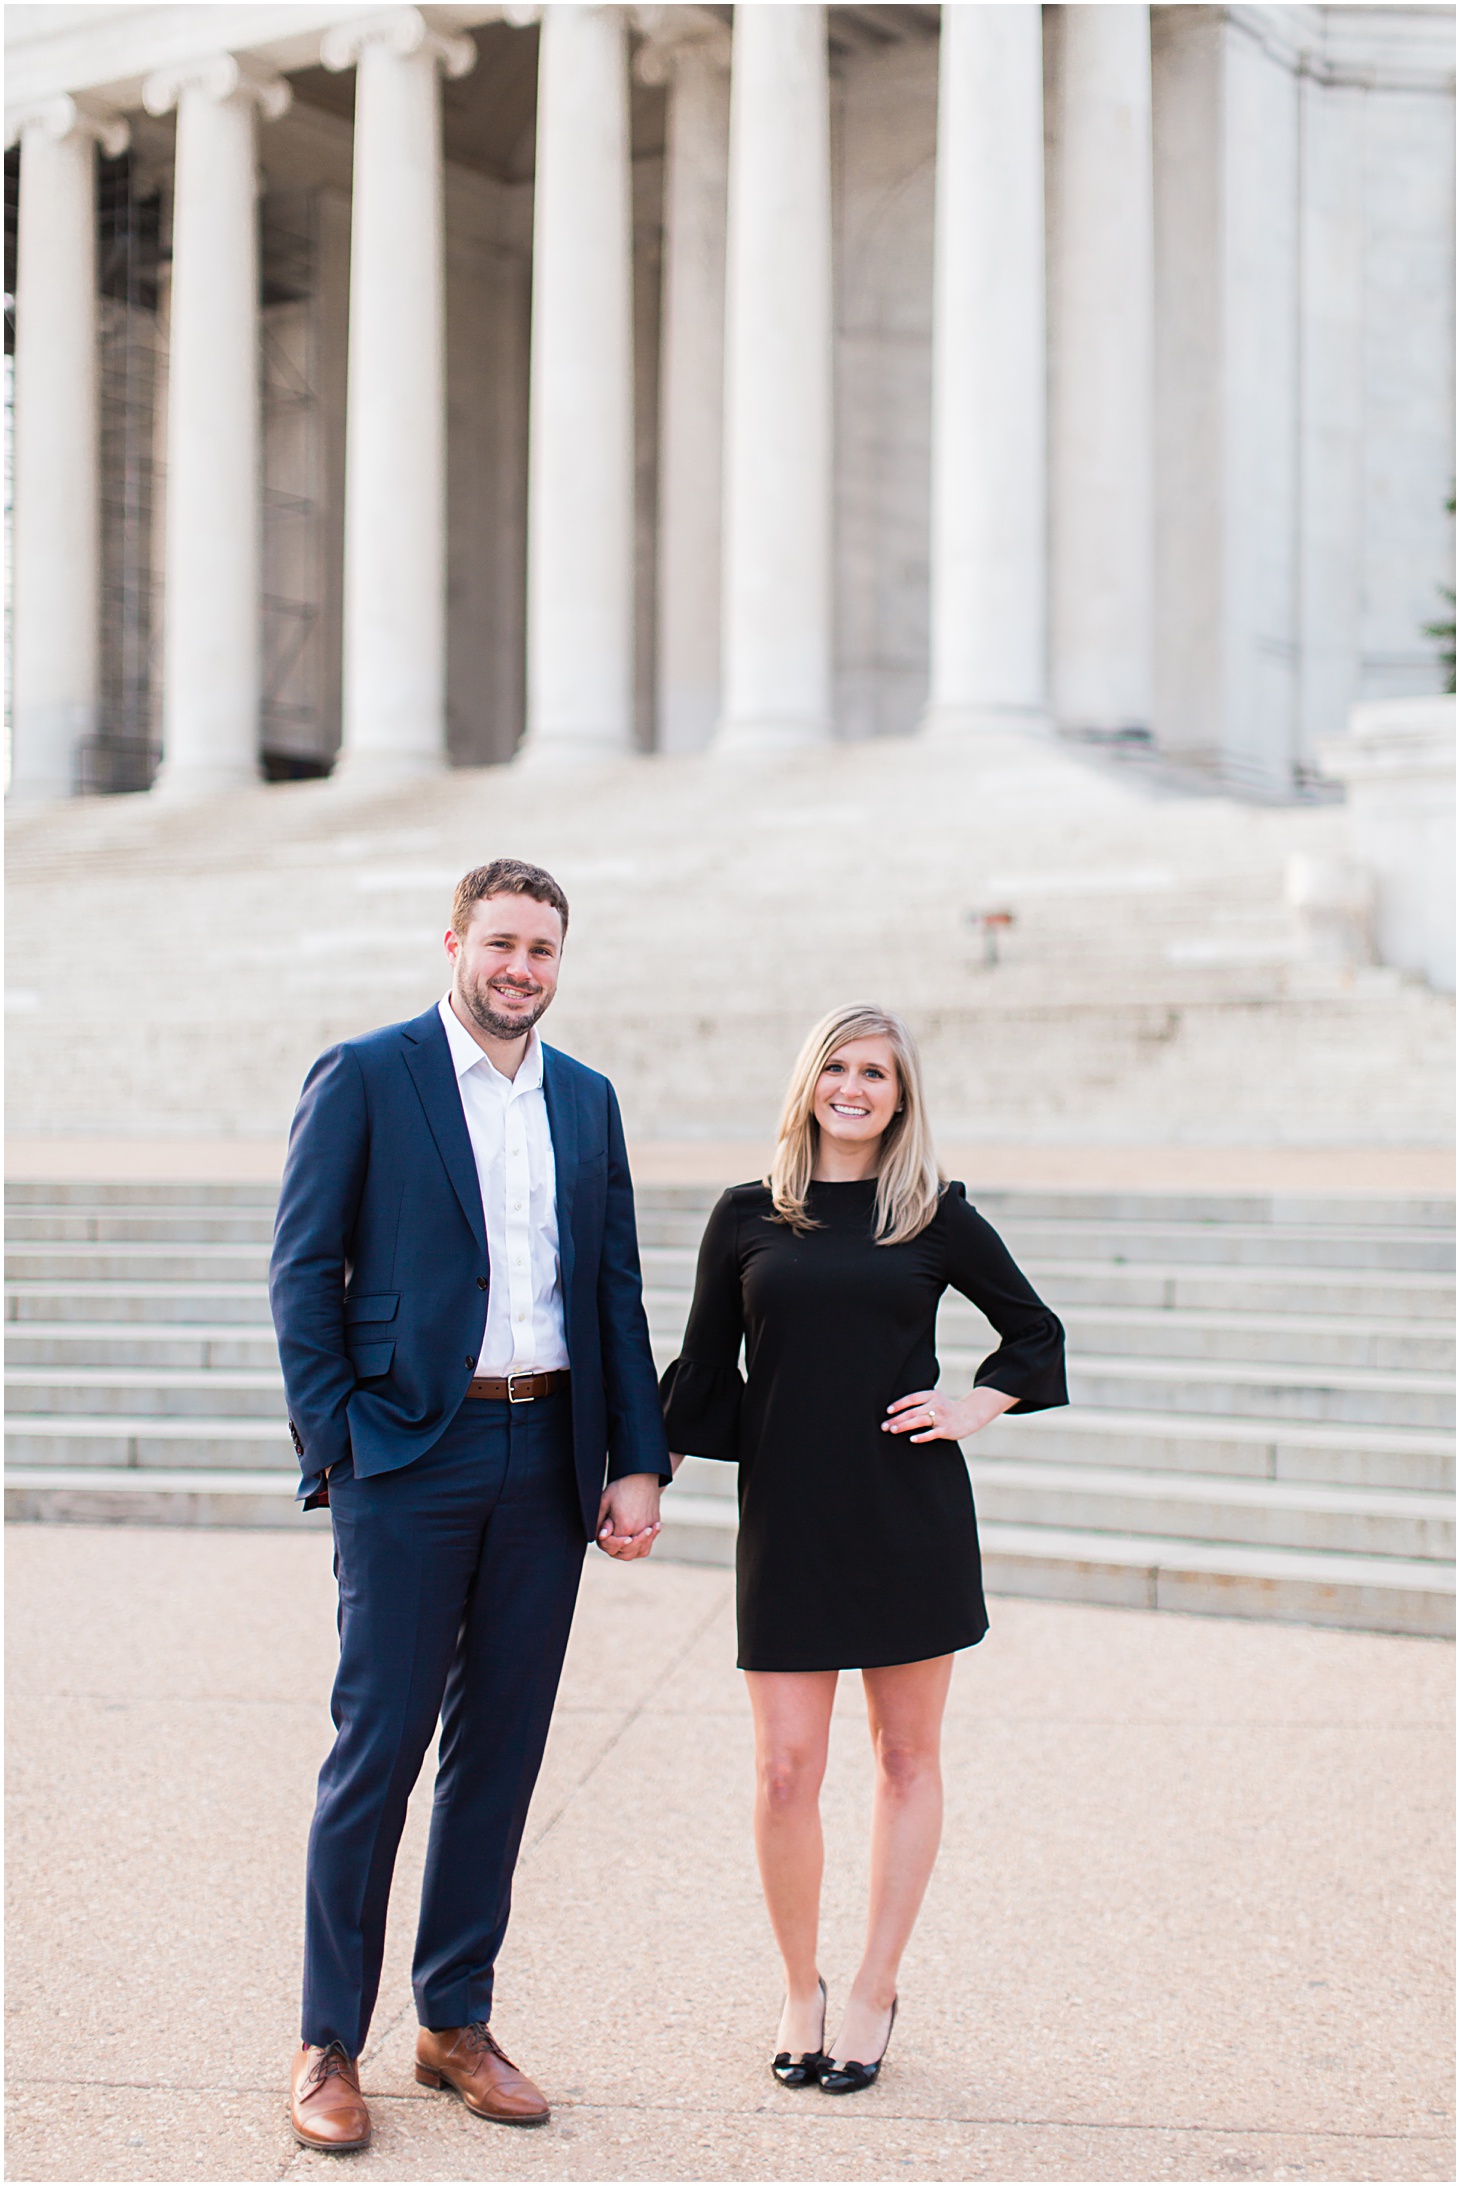 Winter Engagement Session at Jefferson Memorial in DC | Sarah Bradshaw Photography